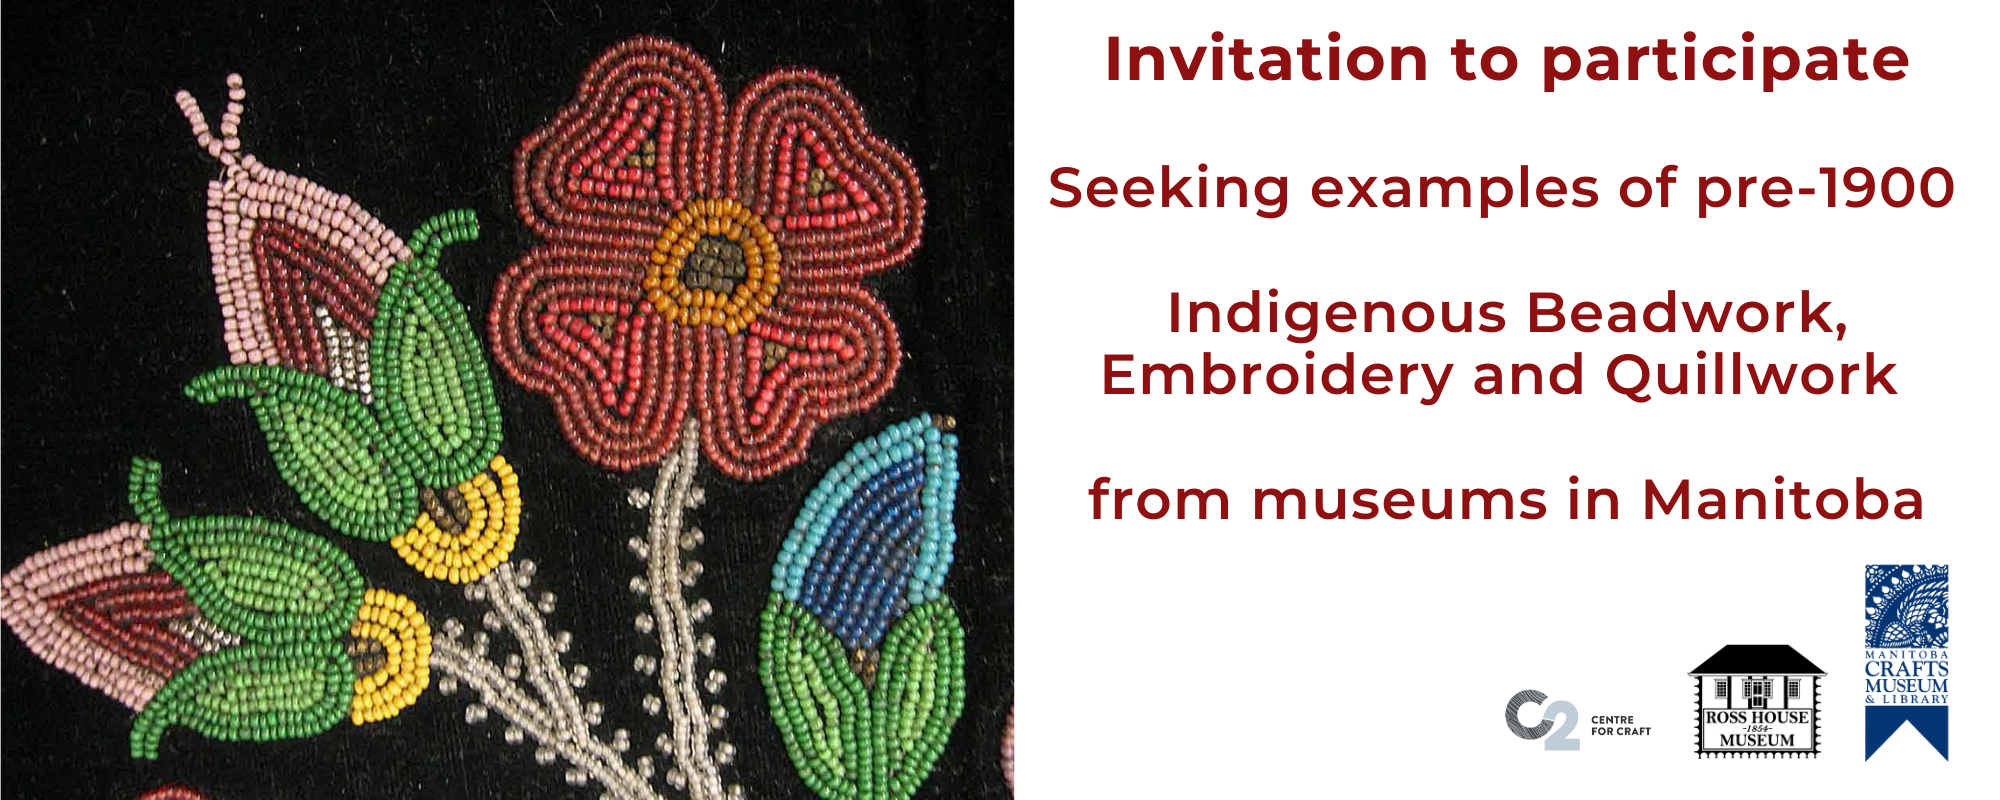 indigenous-beadwork-embroidery-and-quillwork-museum-submission-c2